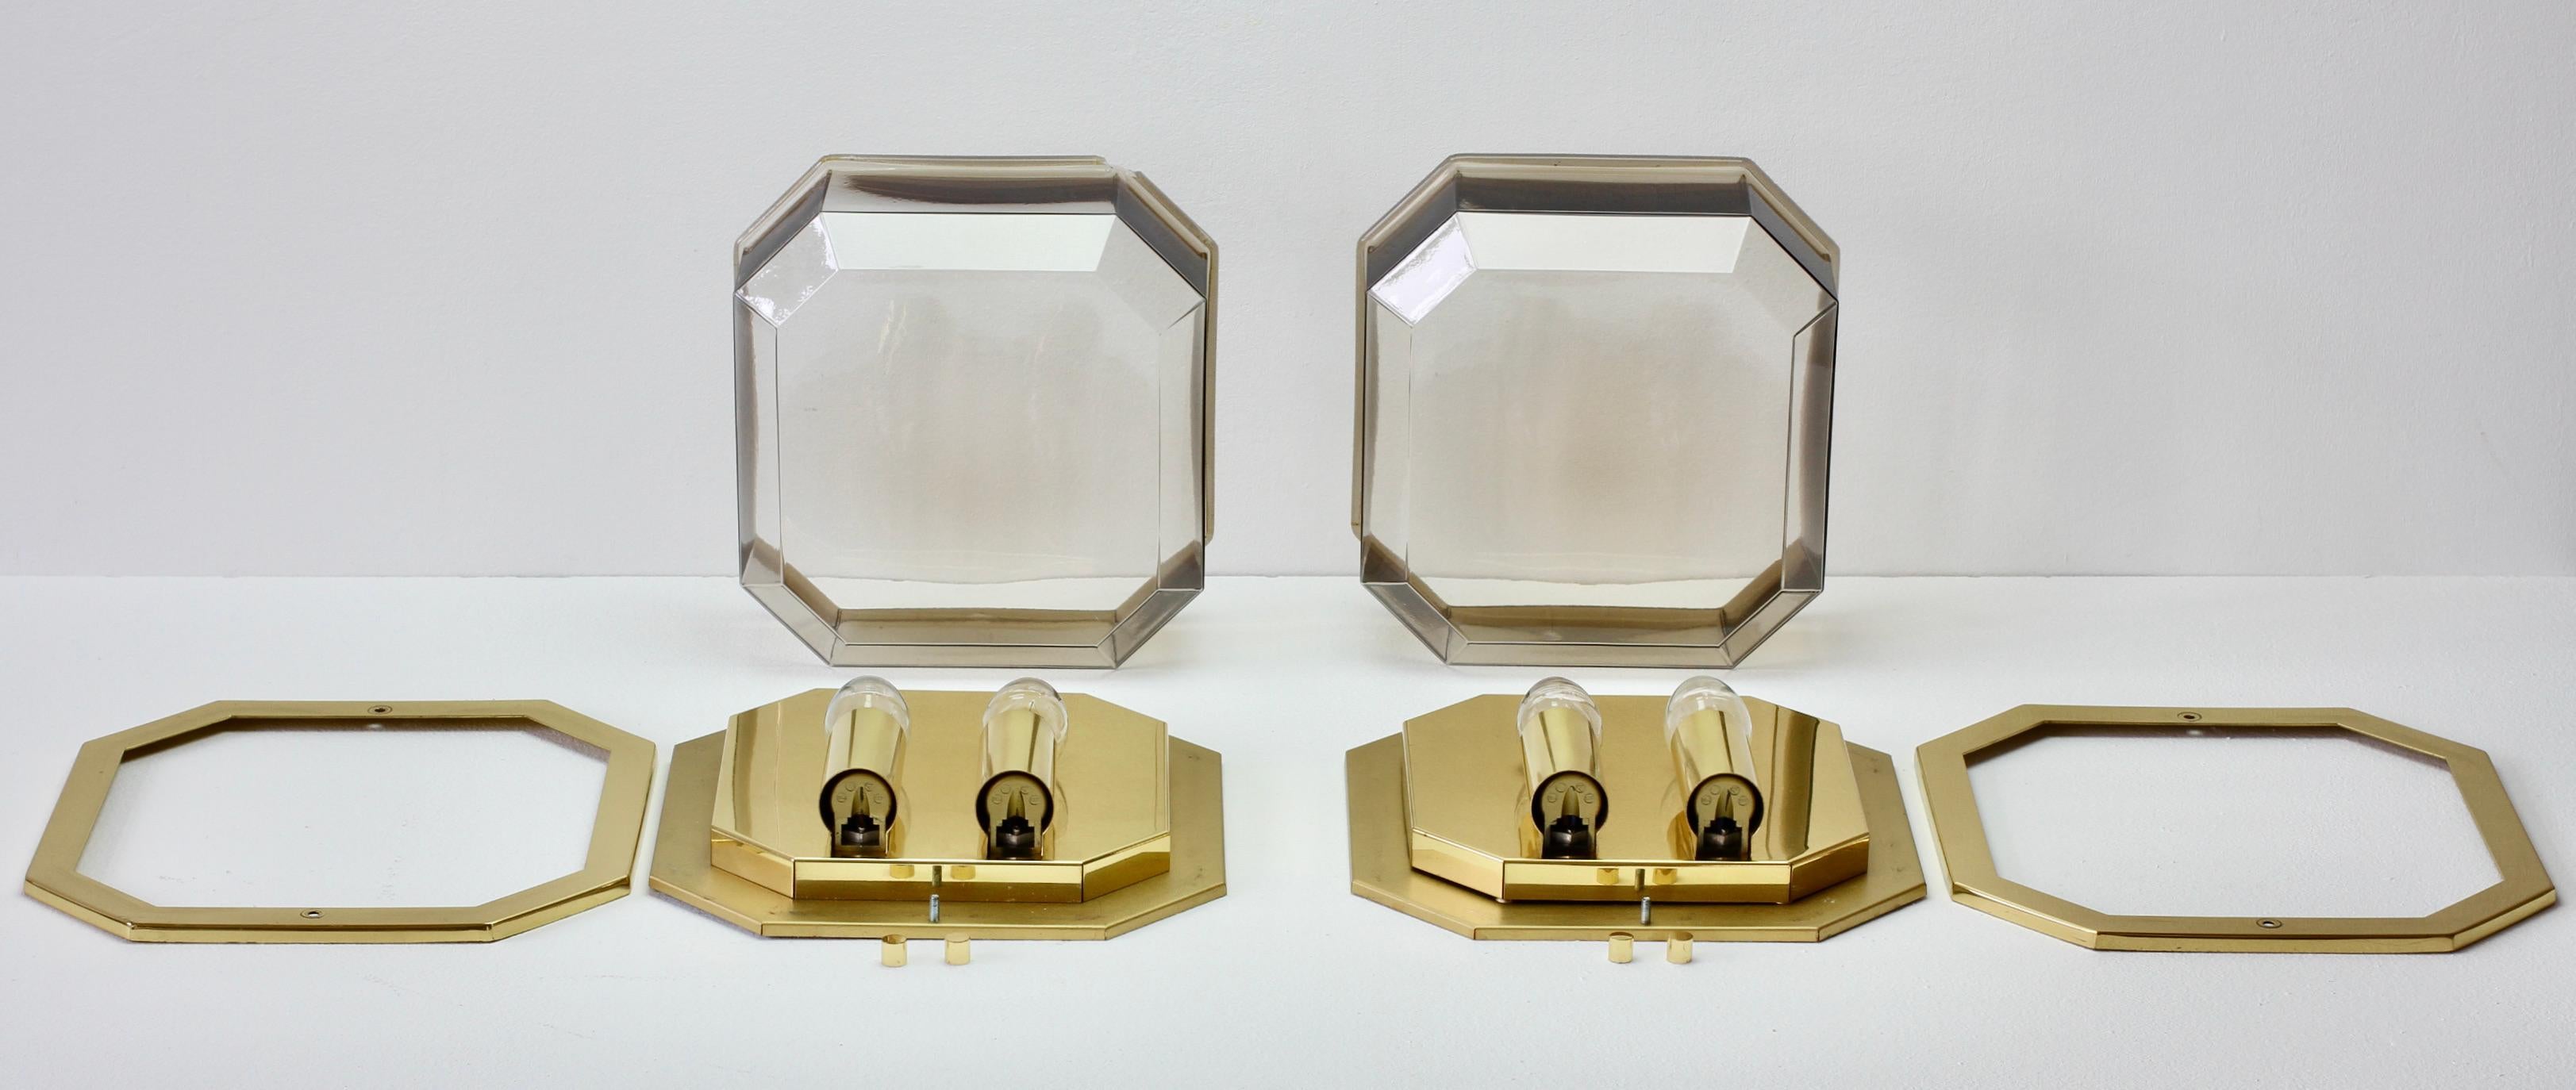 Pair of Geometric Smoked Topaz Glass and Brass Wall Lights by Limburg circa 1980 For Sale 3